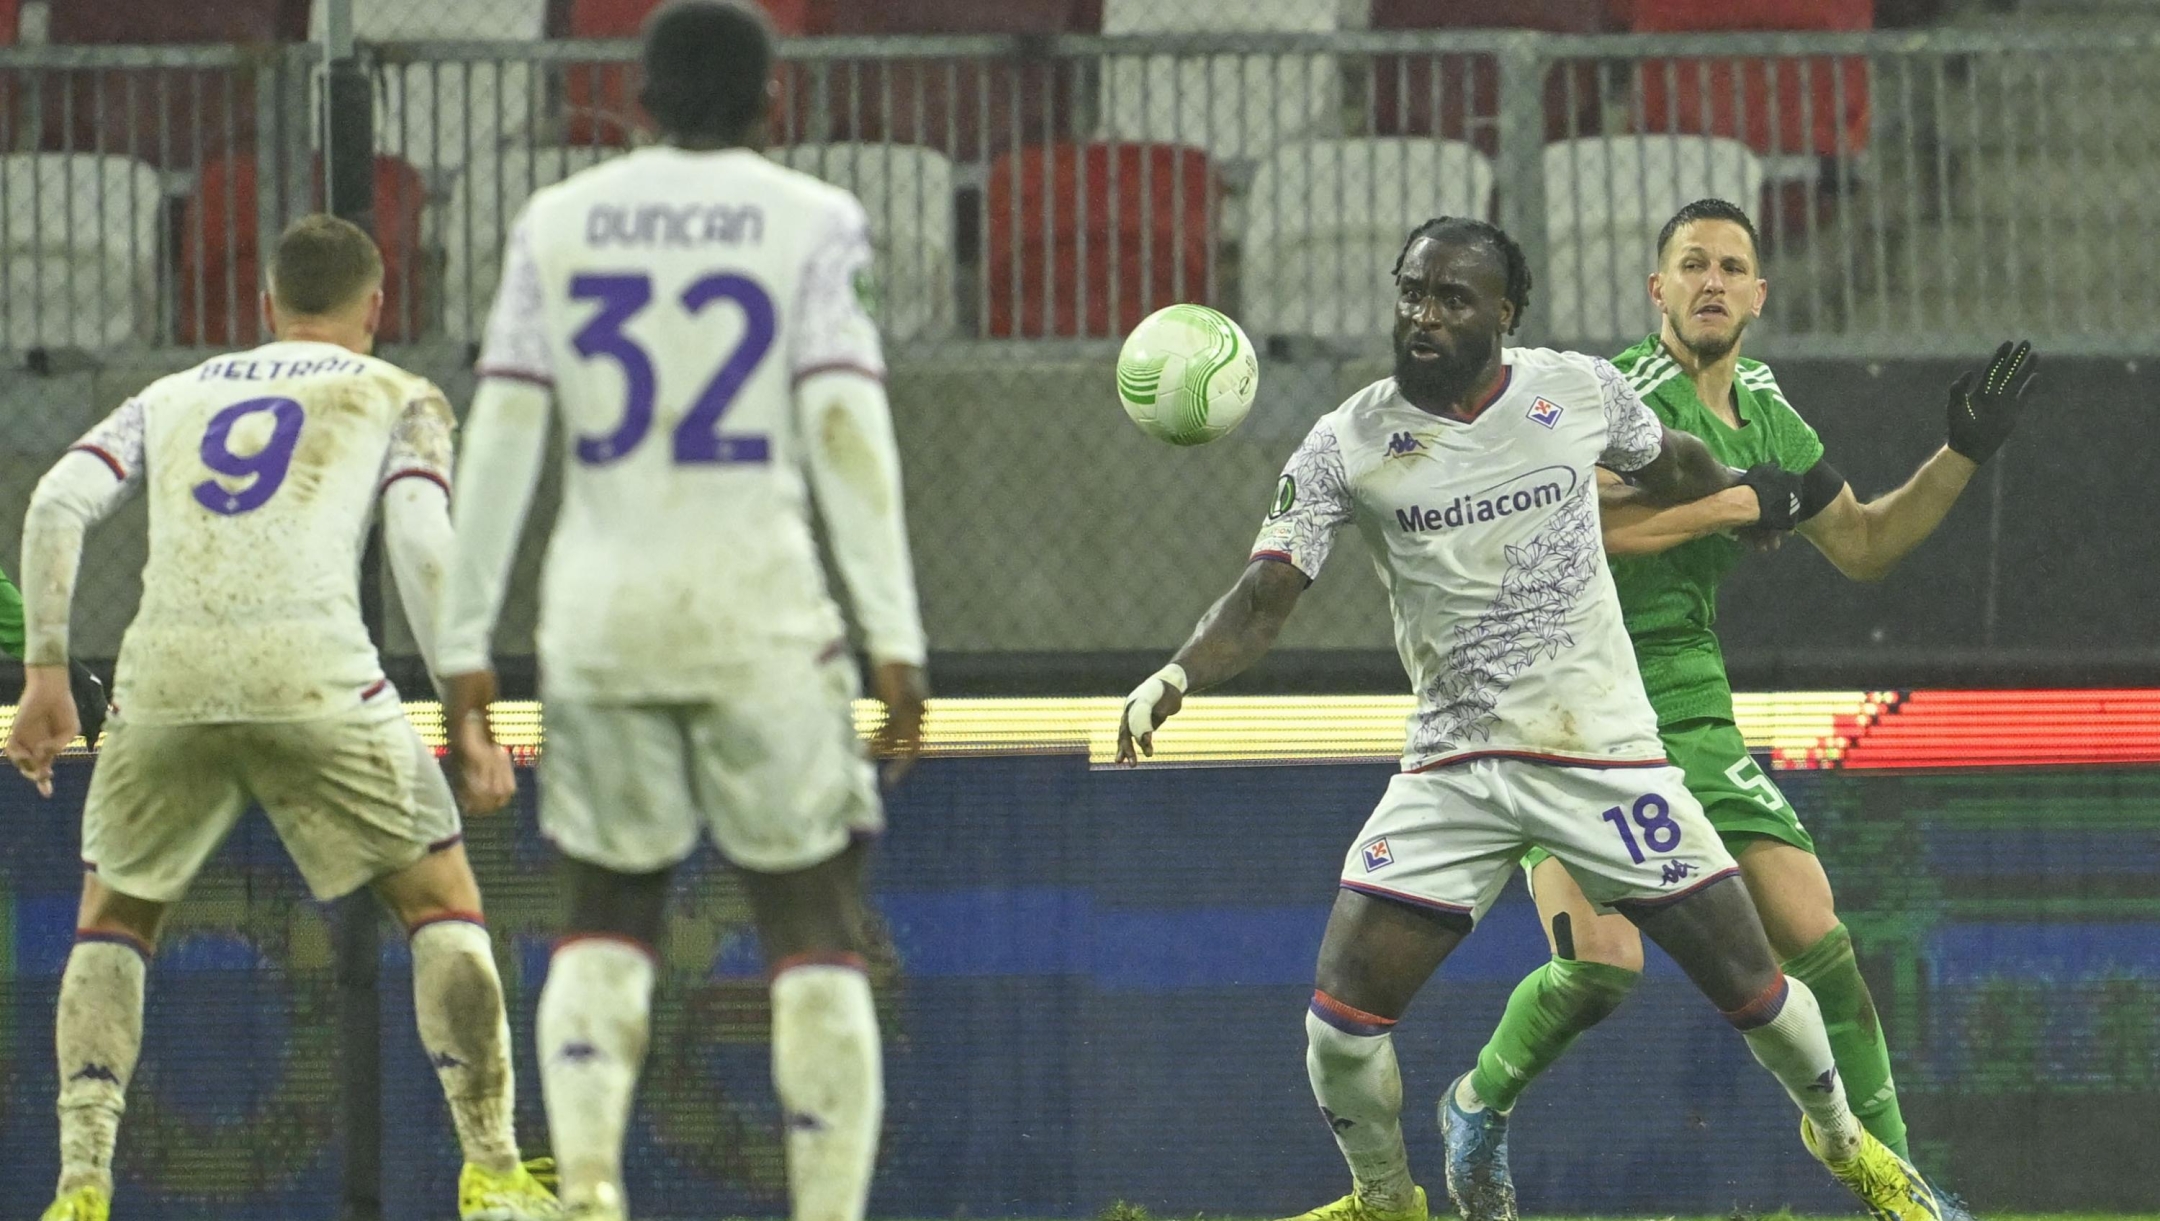 Fiorentina's M'Bala Nzola, front right, duels for the ball with Maccabi Haifa's Rami Gershon during the Europa Conference League round of 16 first leg soccer match between Maccabi Haifa and Fiorentina at the Boszik Arena in Budapest, Thursday, March 7, 2024. (AP Photo/Denes Erdos)